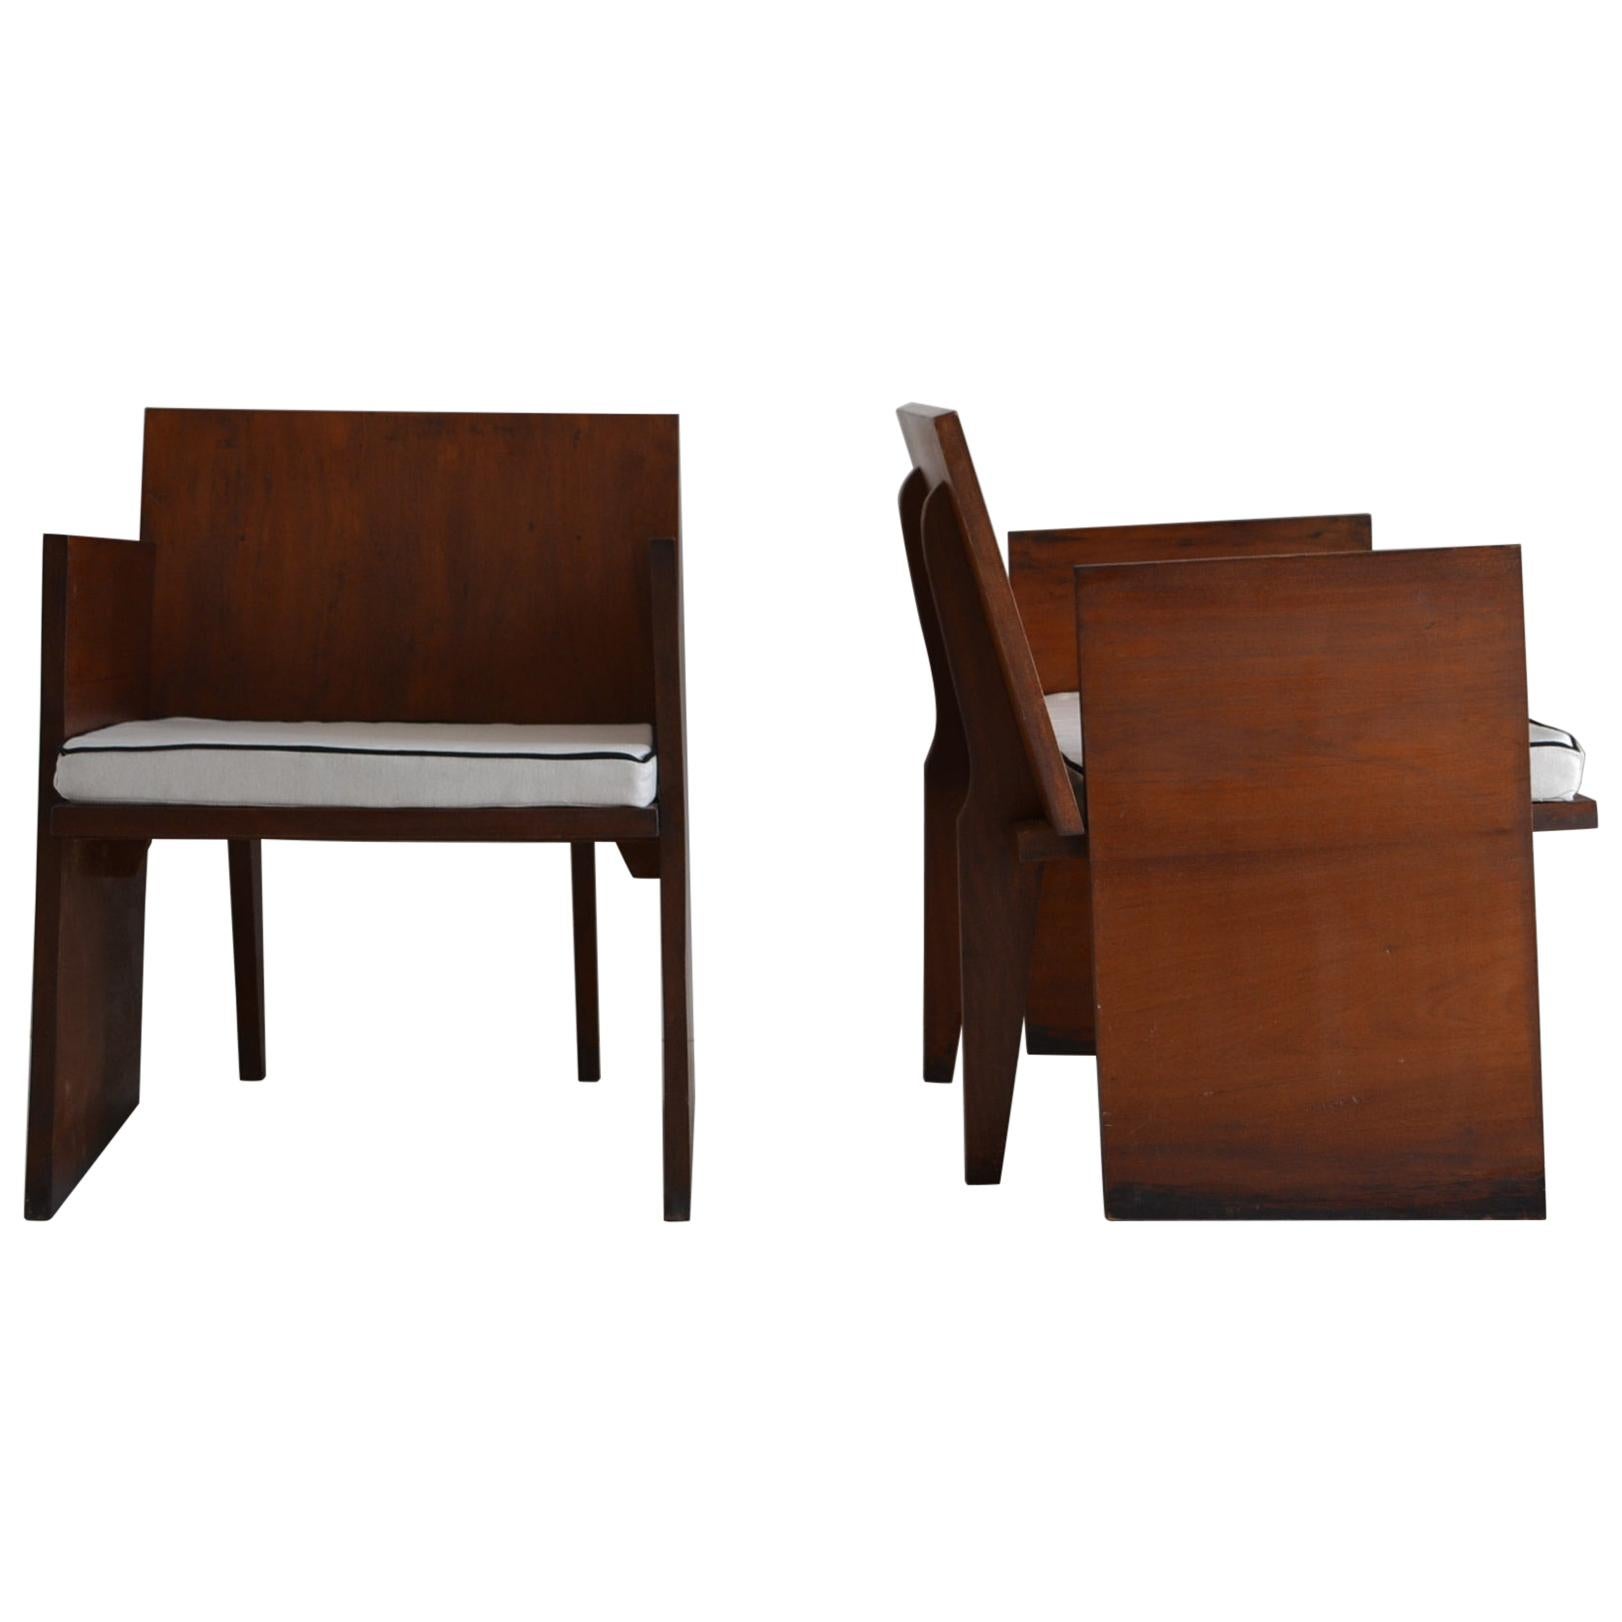 Pair of Brutalist Mahogany Chairs, Modernism